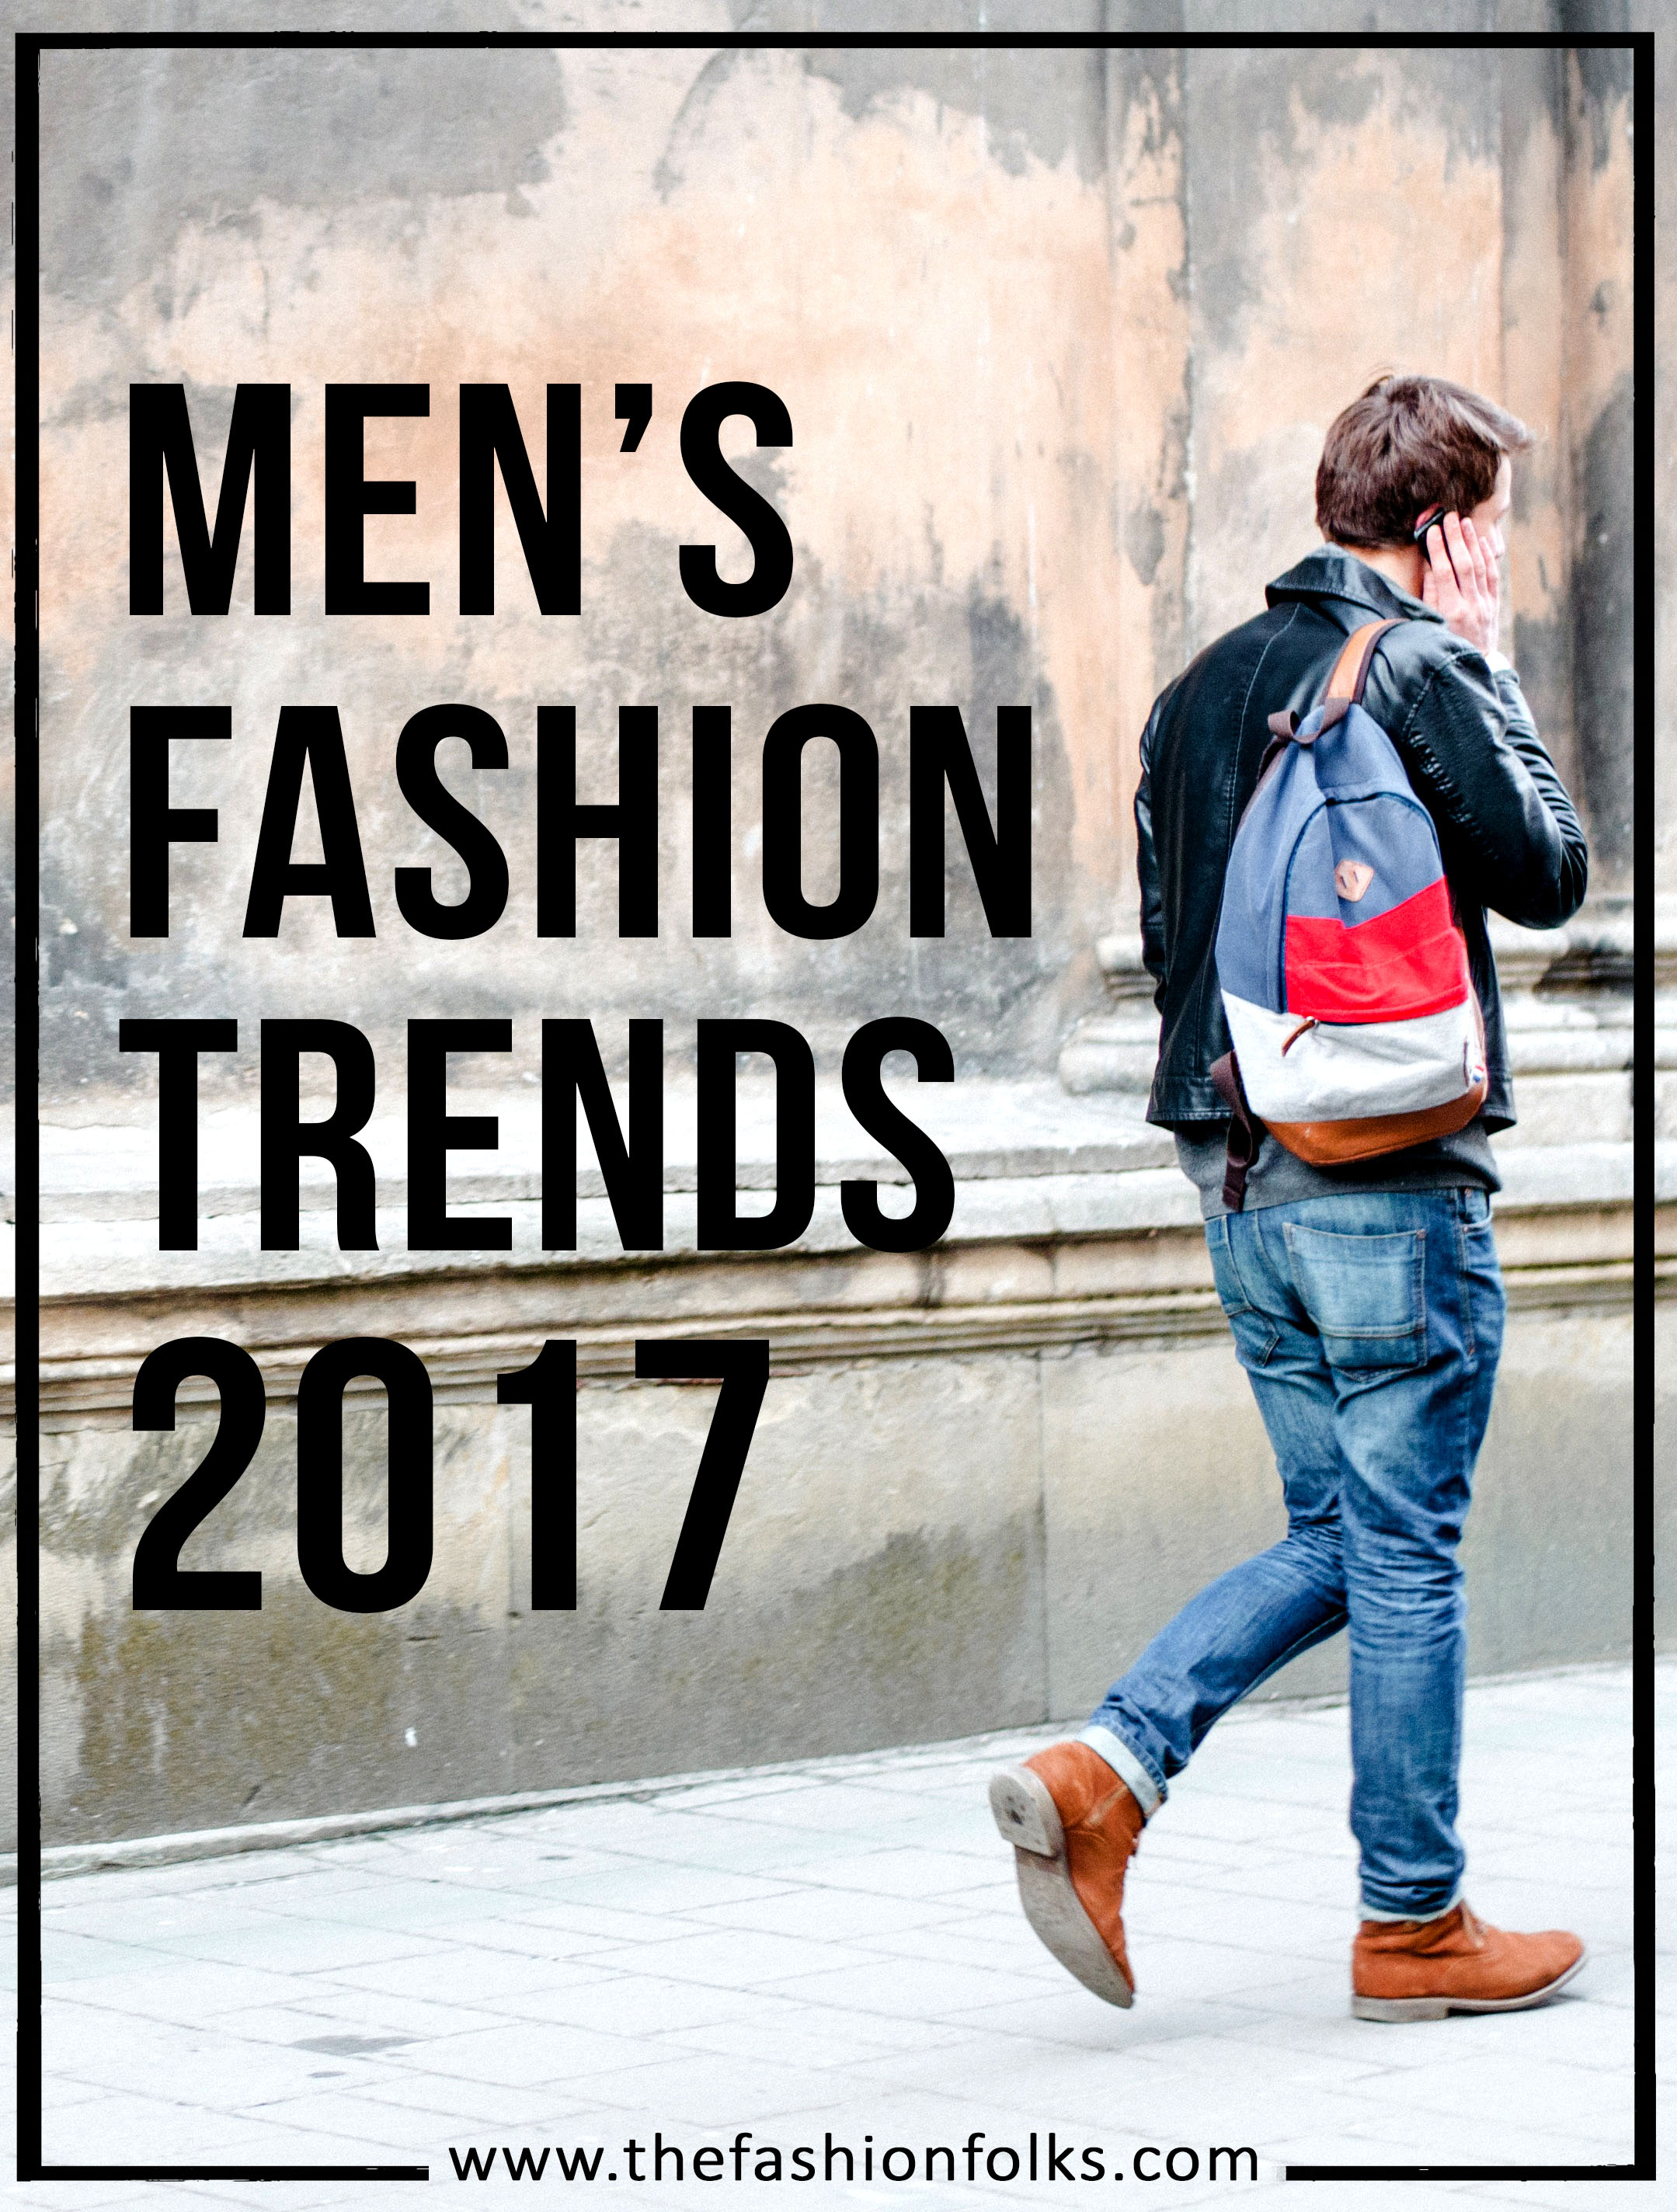 Men's Fashion Trends 2017 Summer/Spring - 1980s fashion, Monochrome Outfits, Street Style, Statement Jackets and Tied Jacket Around The Waist | The Fashion Folks